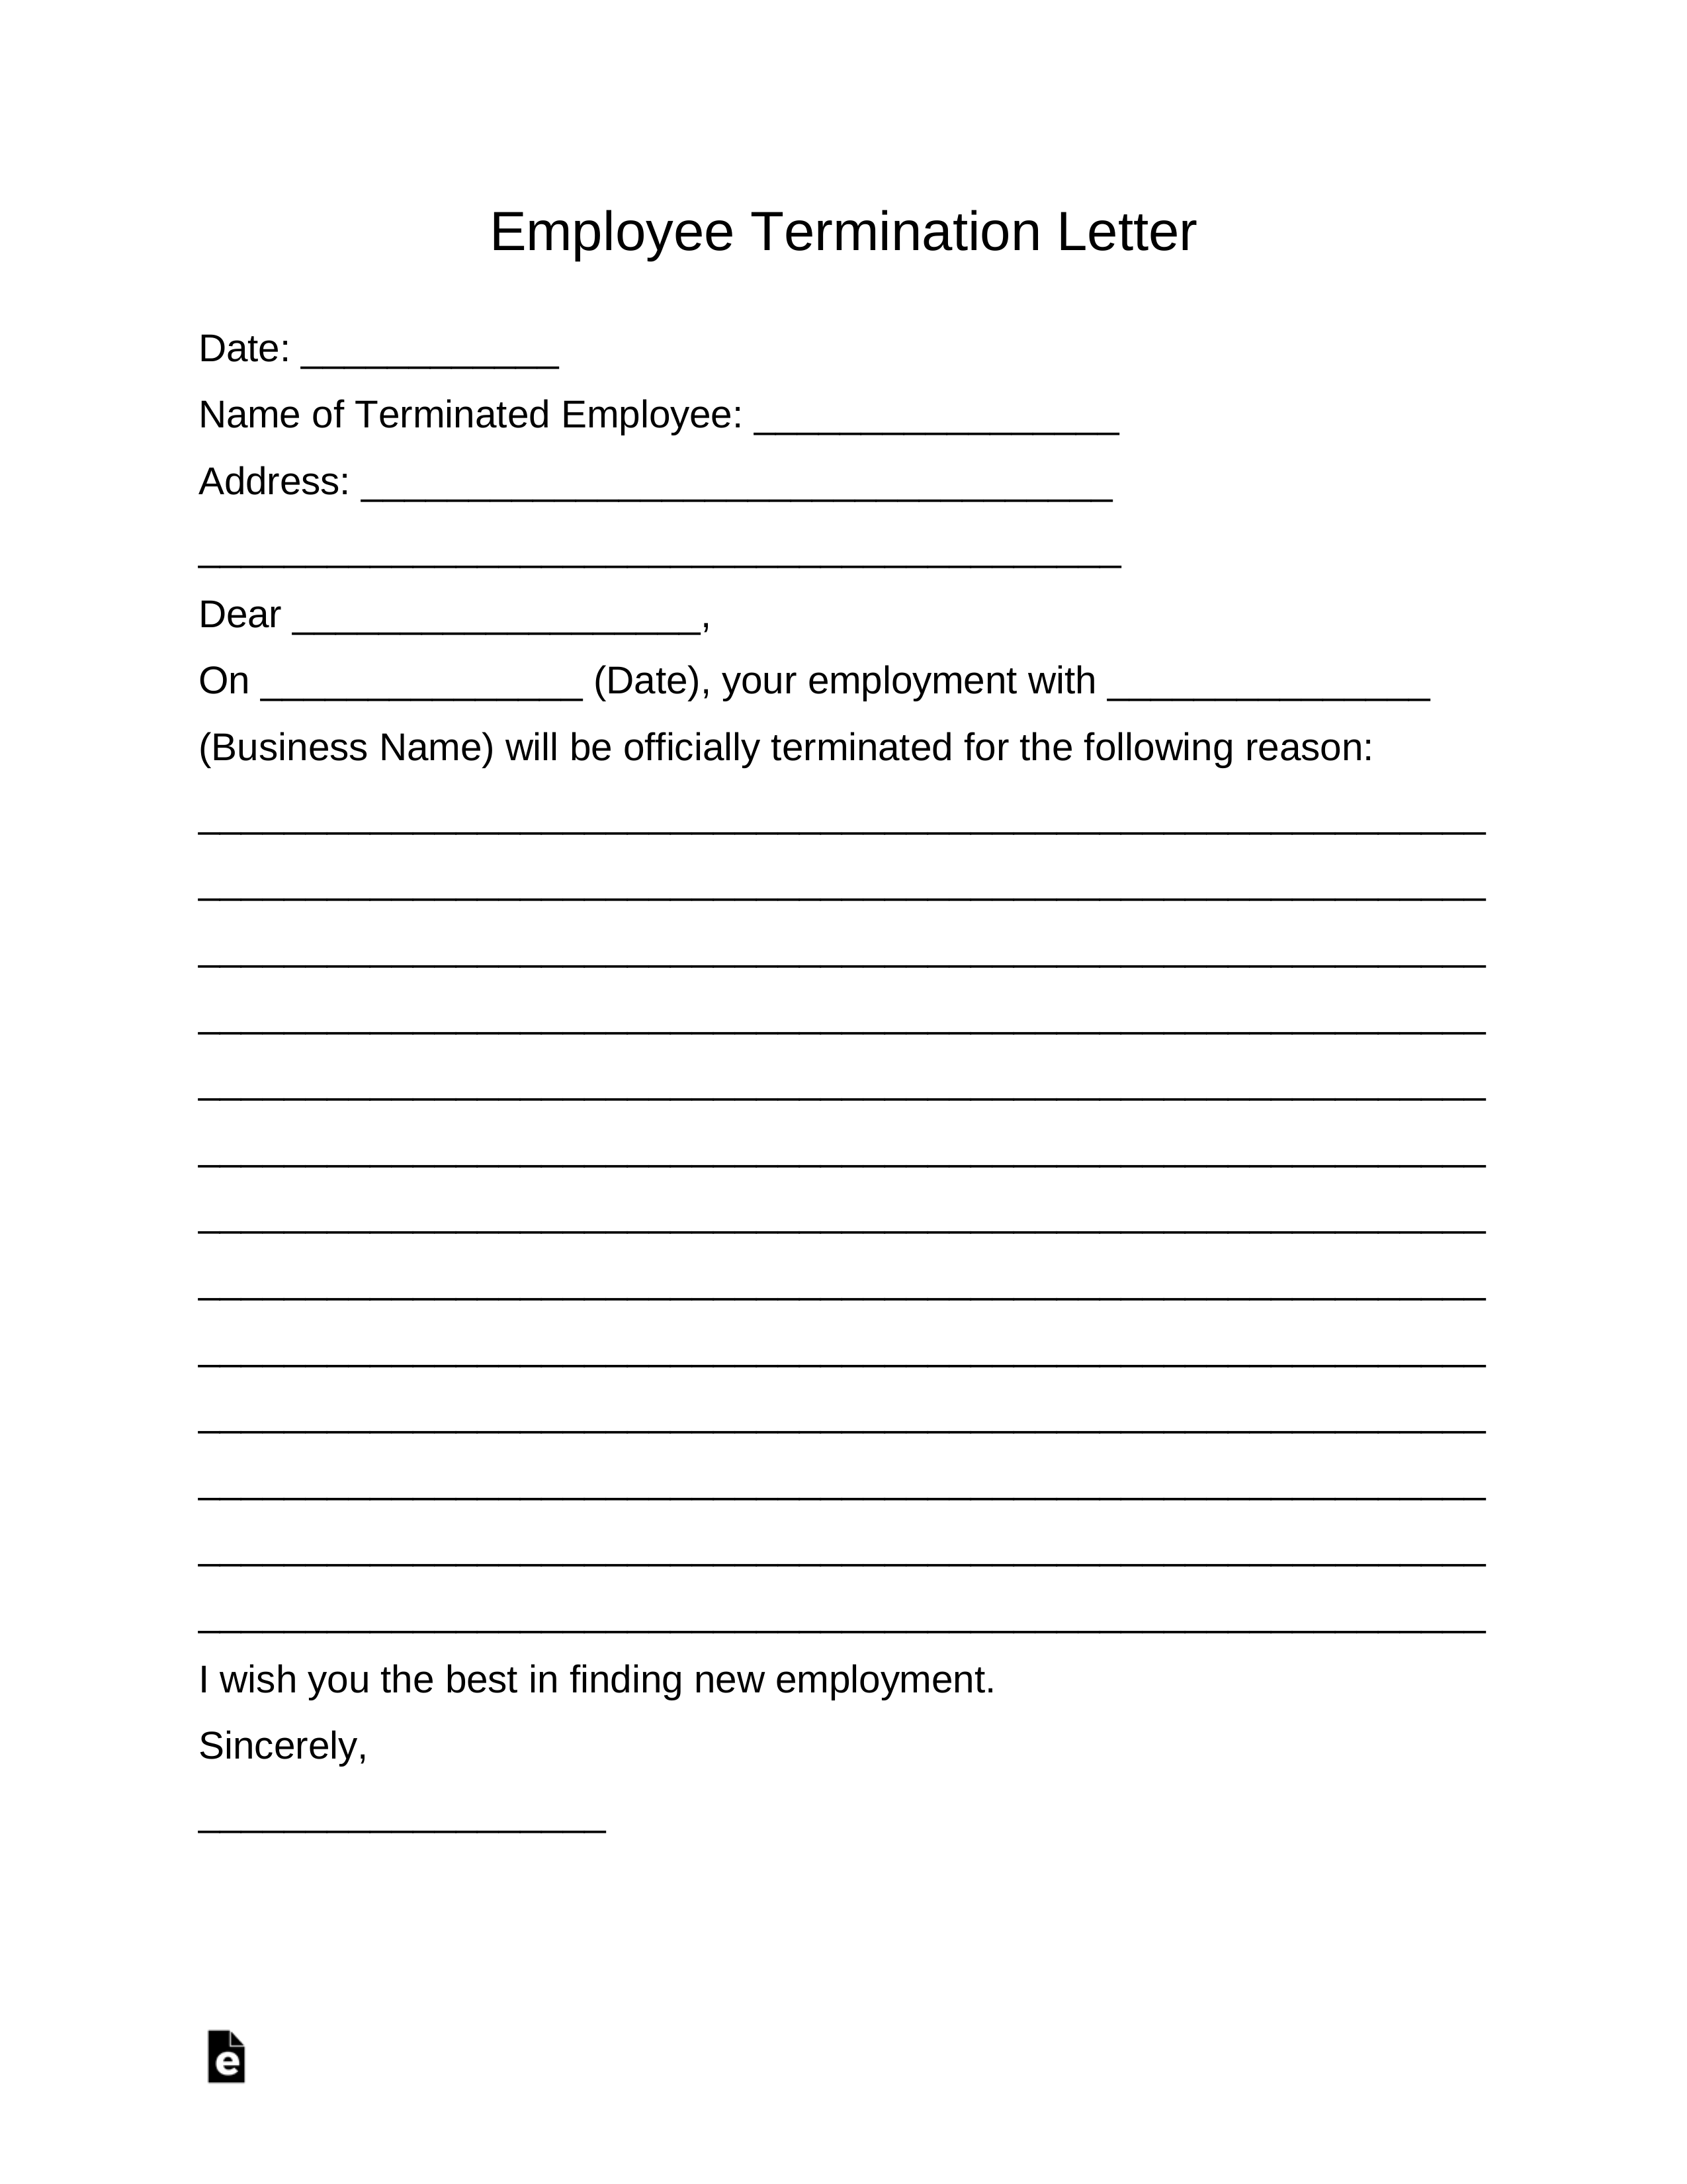 Sample Wrongful Termination Letter To Employer from eforms.com